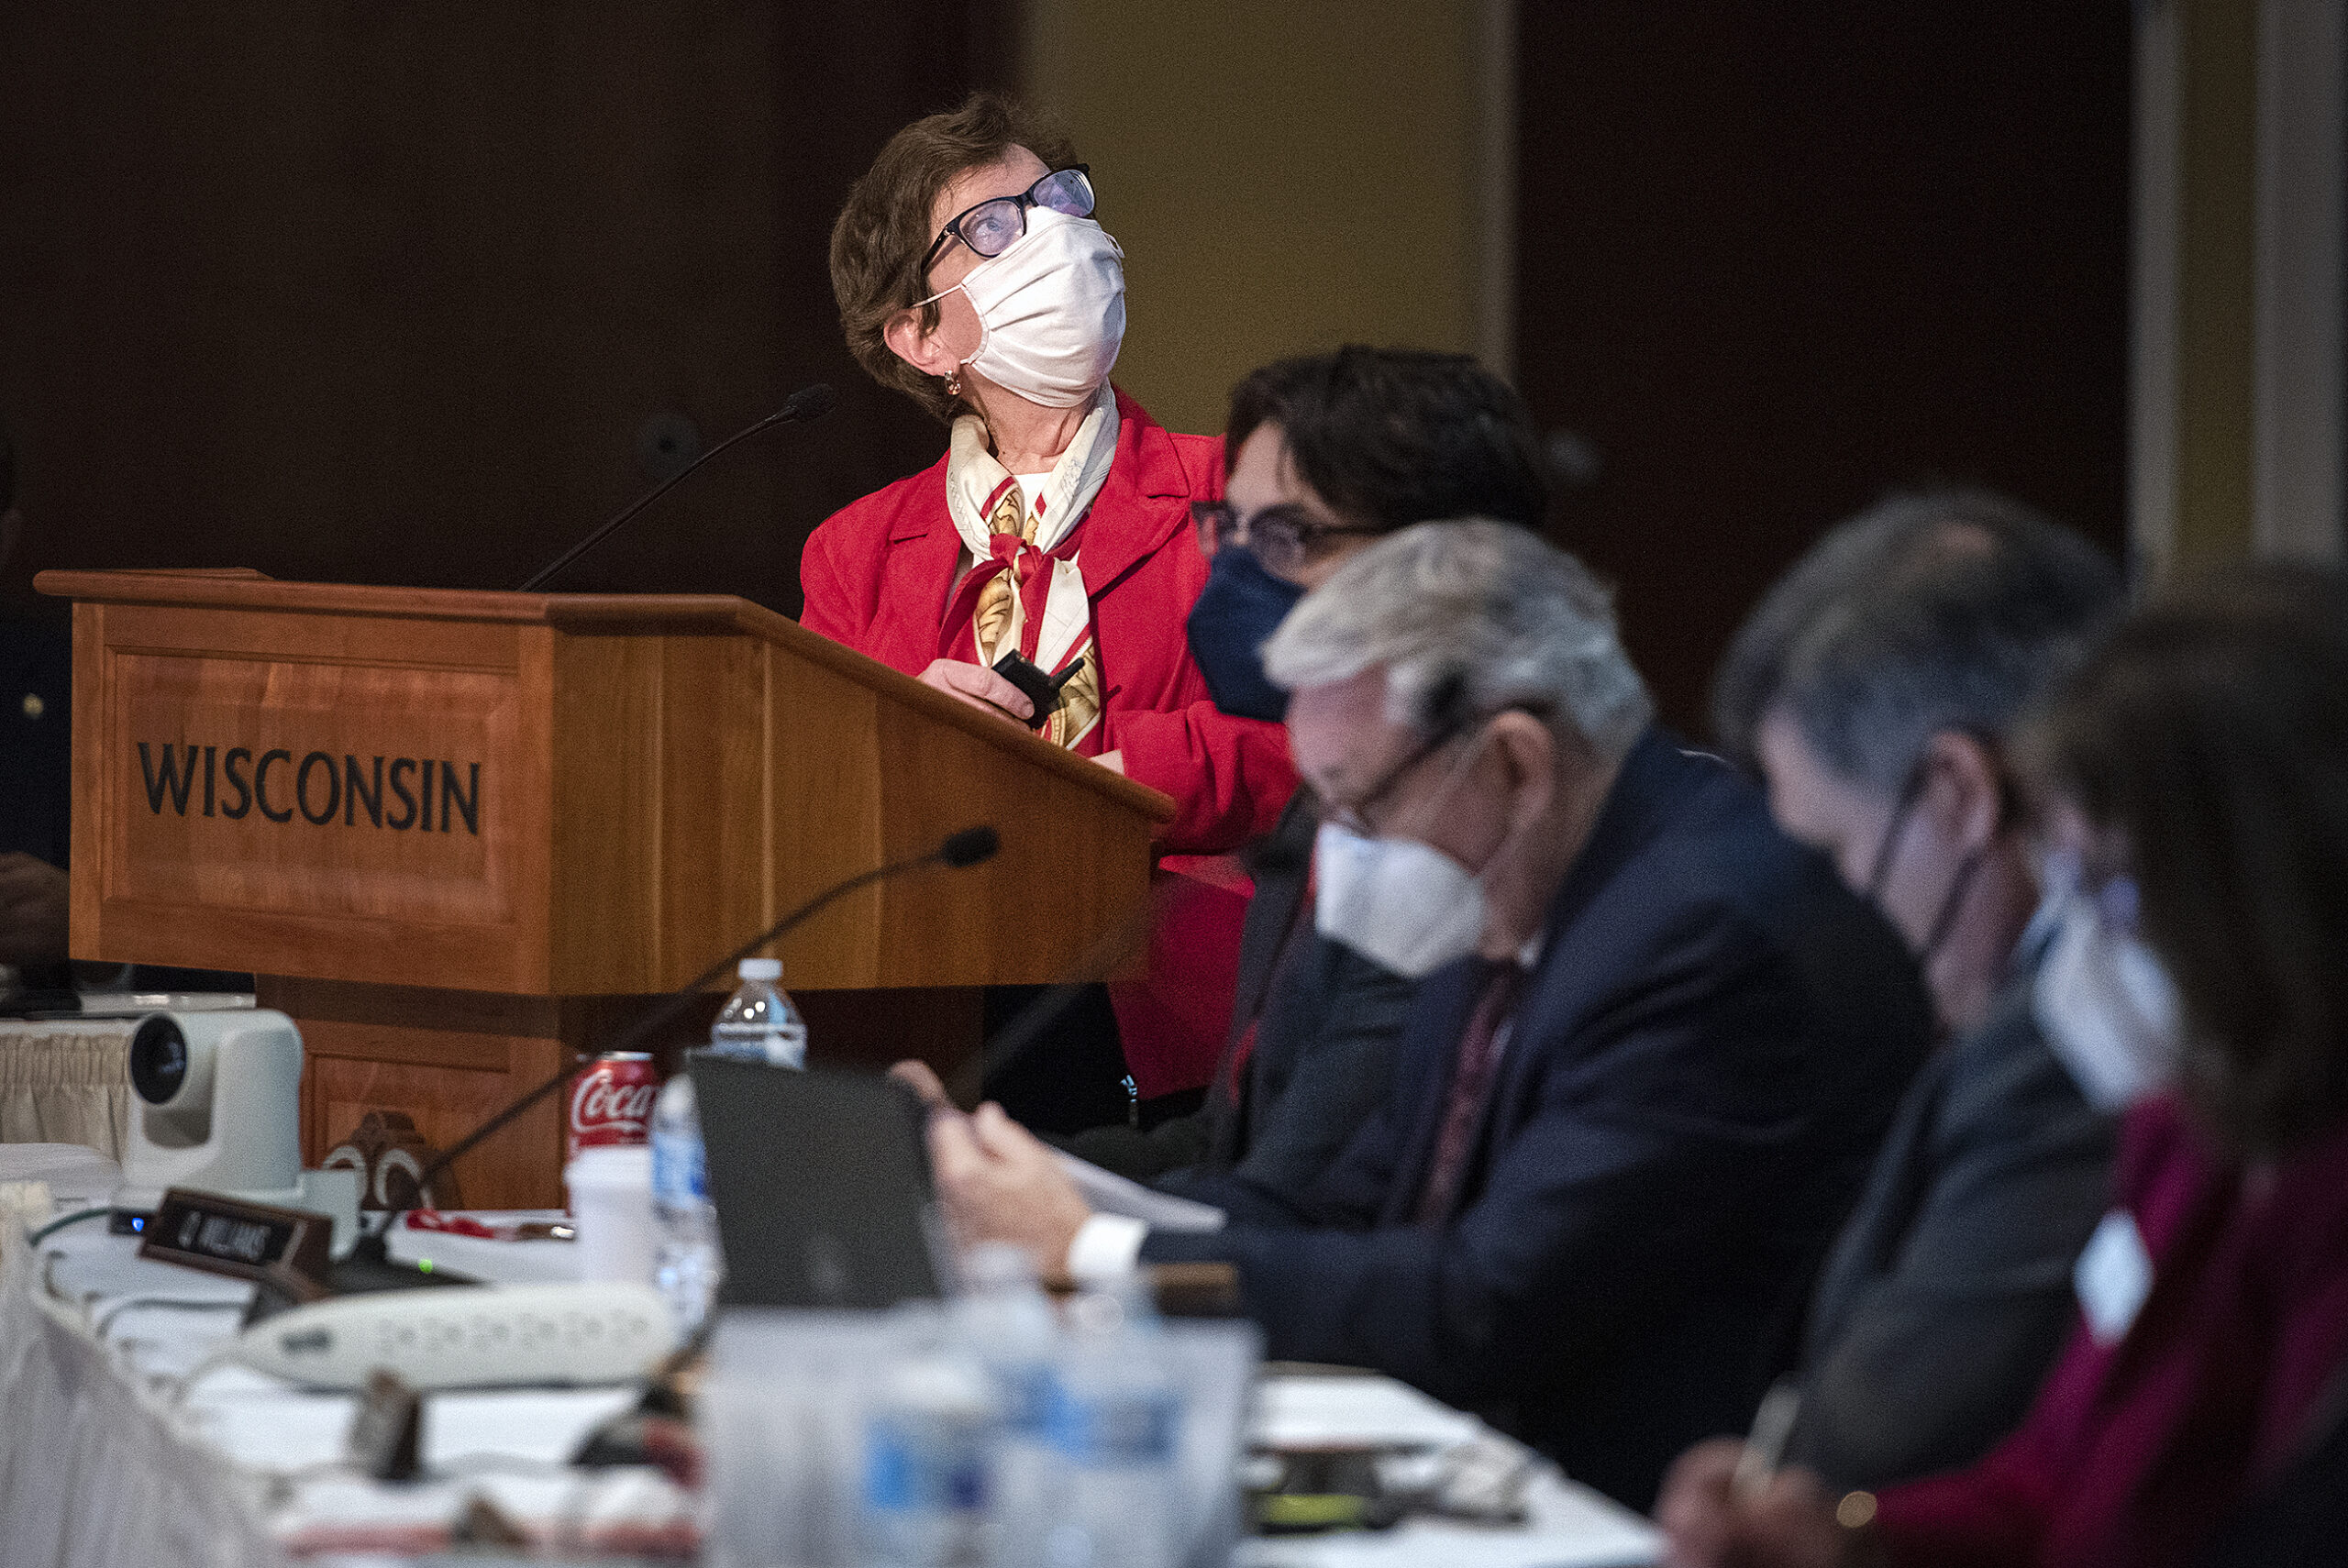 Rebecca Blank stands at a podium while speaking. She wears a white face mask and a red jacket.